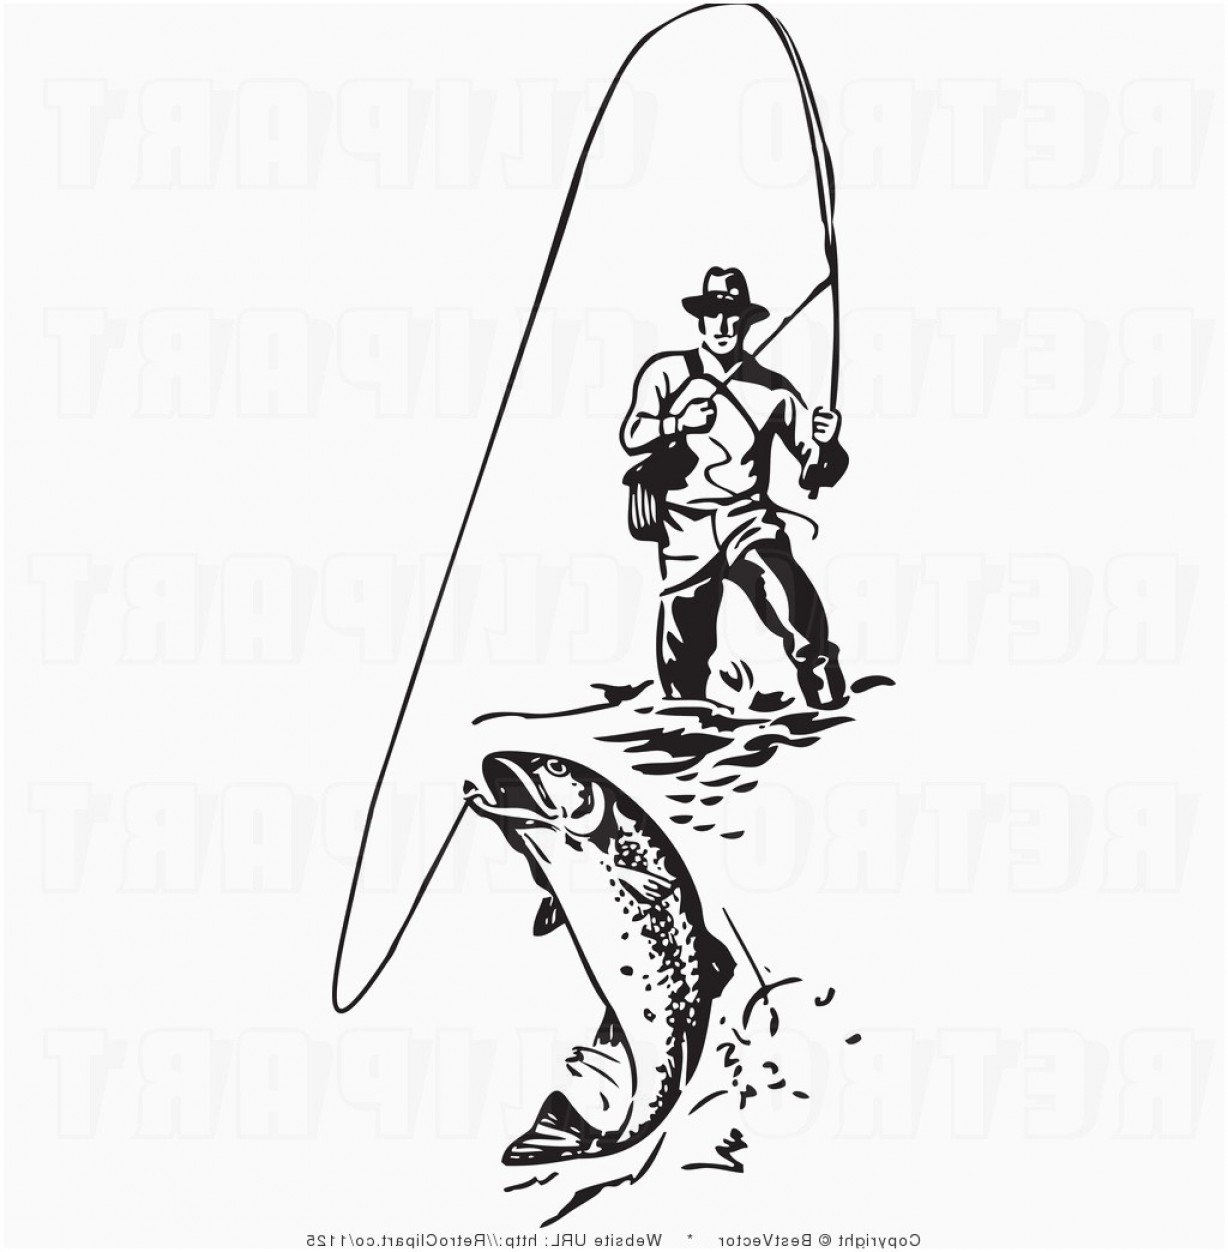 Fly fishing clipart black and white